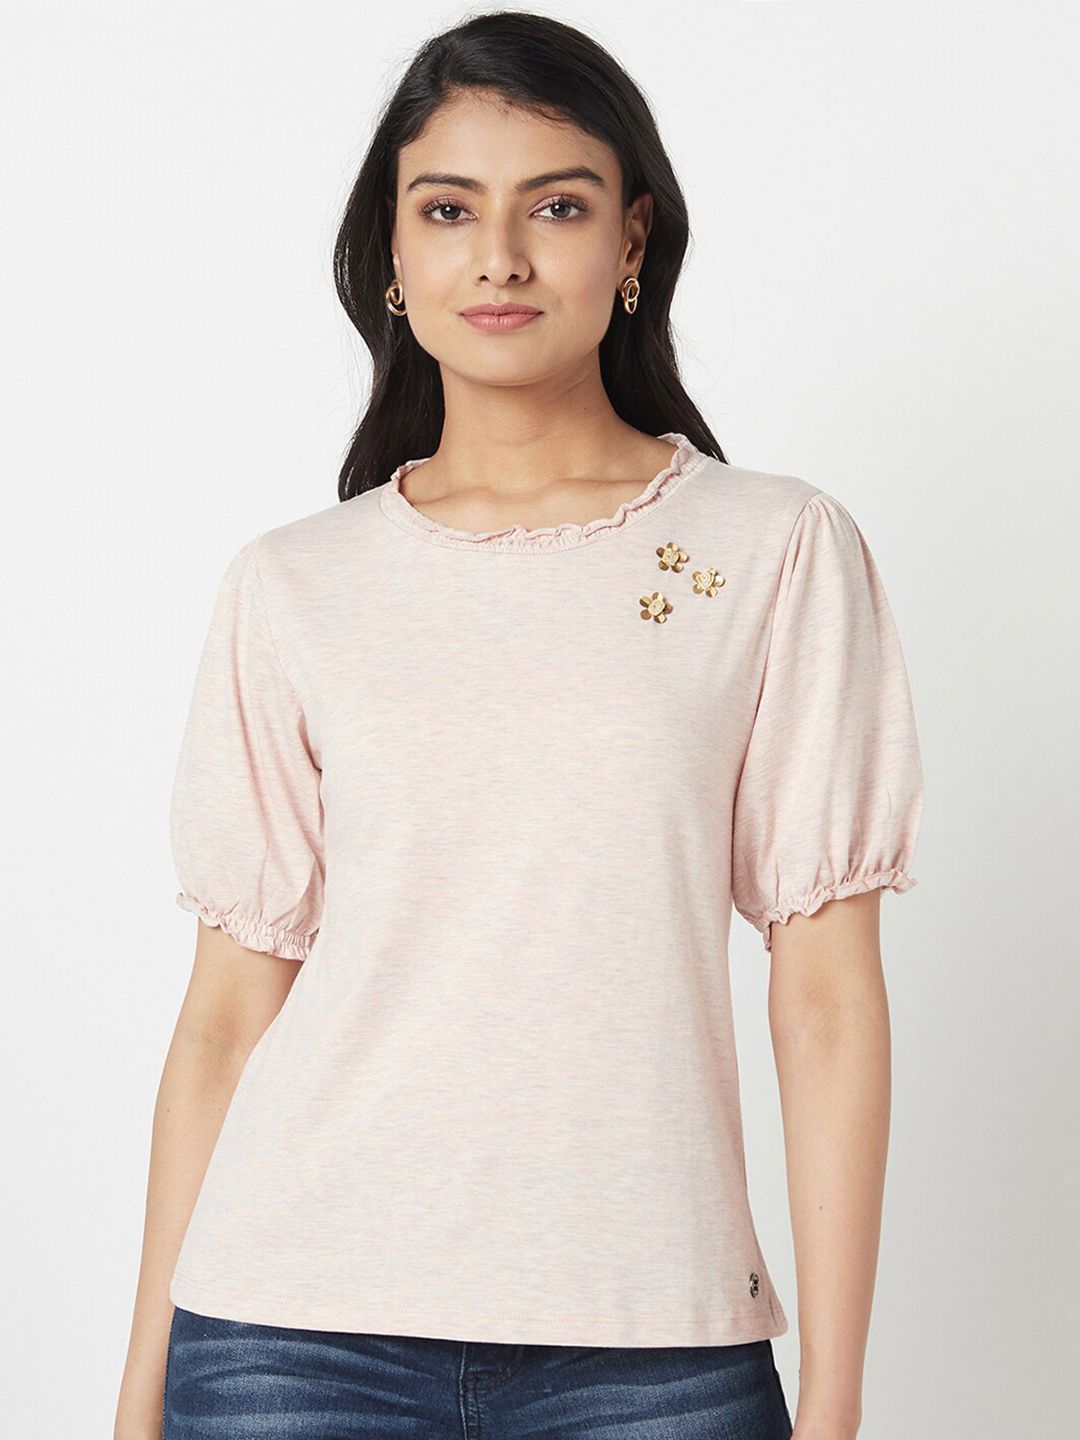 Miss Grace Round Neck Puff Sleeve Top Price in India